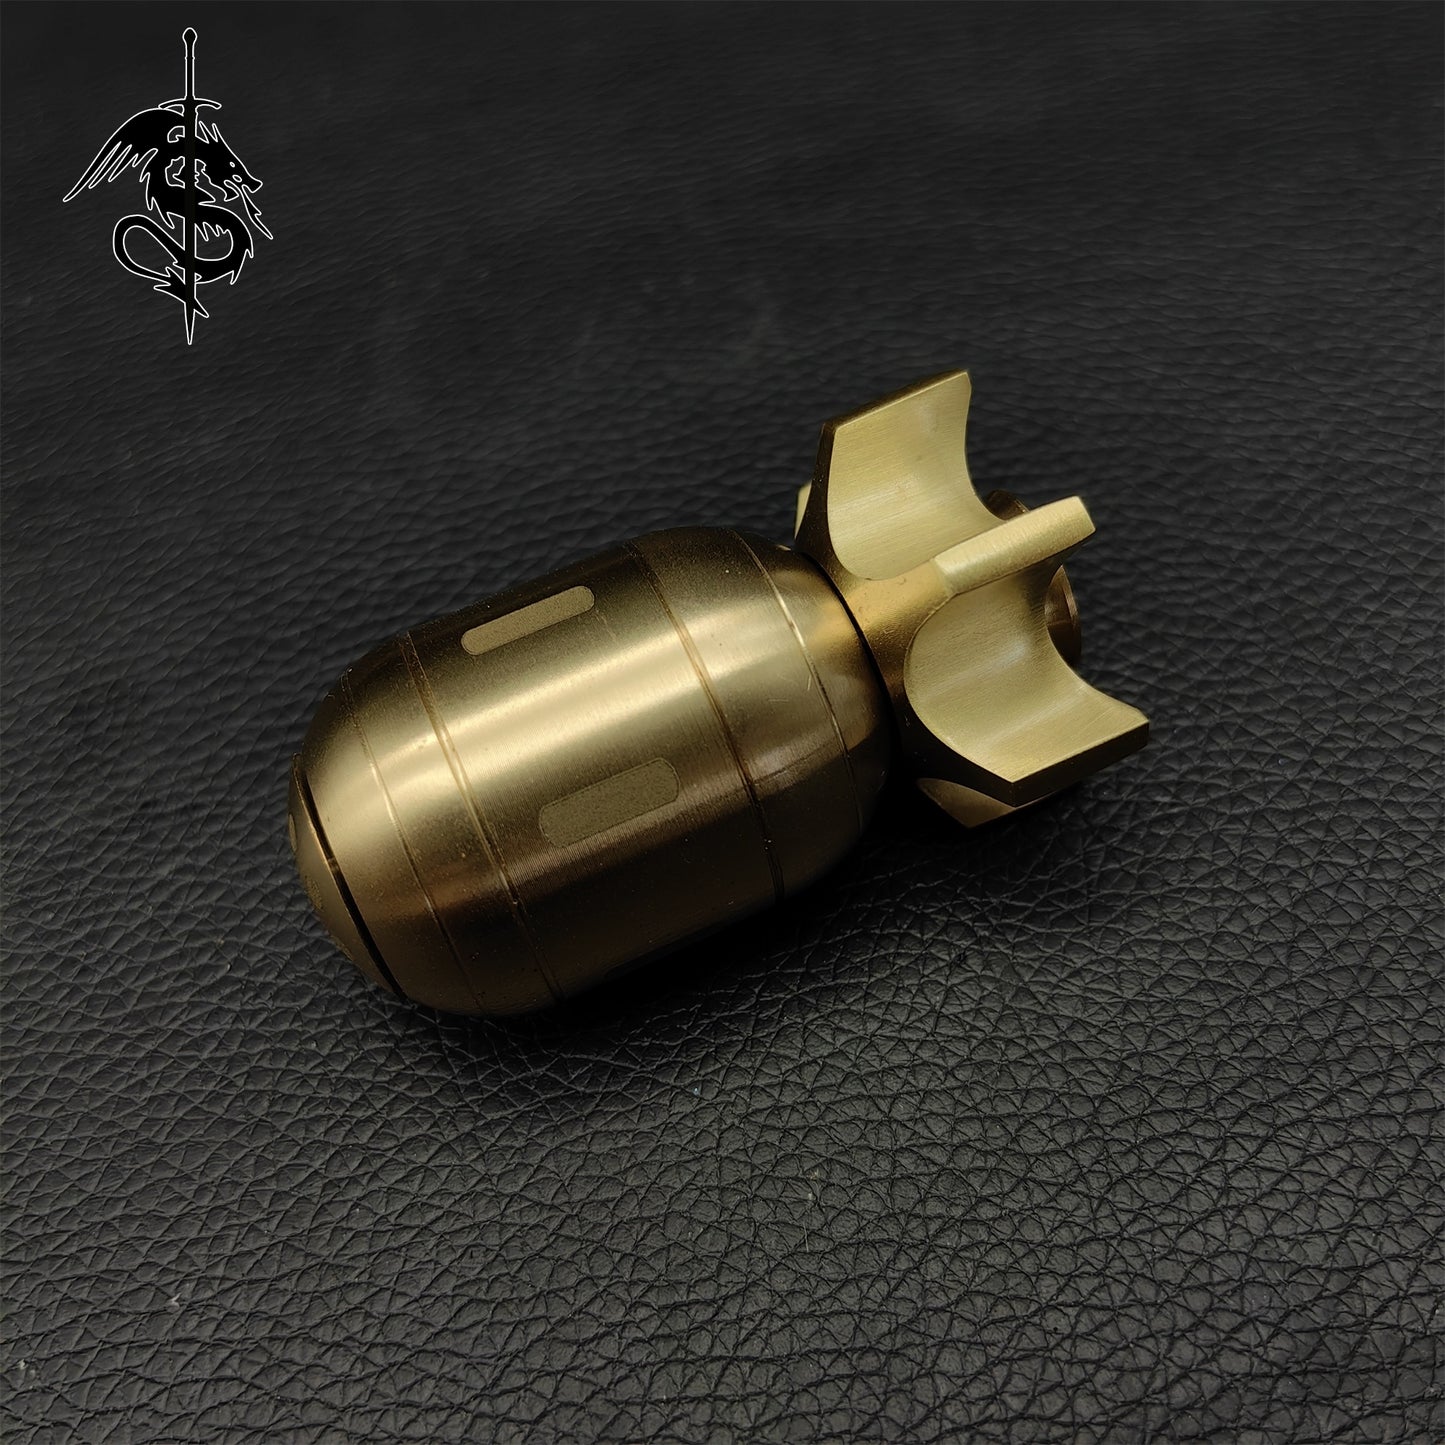 Brass Bomb Nuclear Bomb Replica Military Hobby Gift